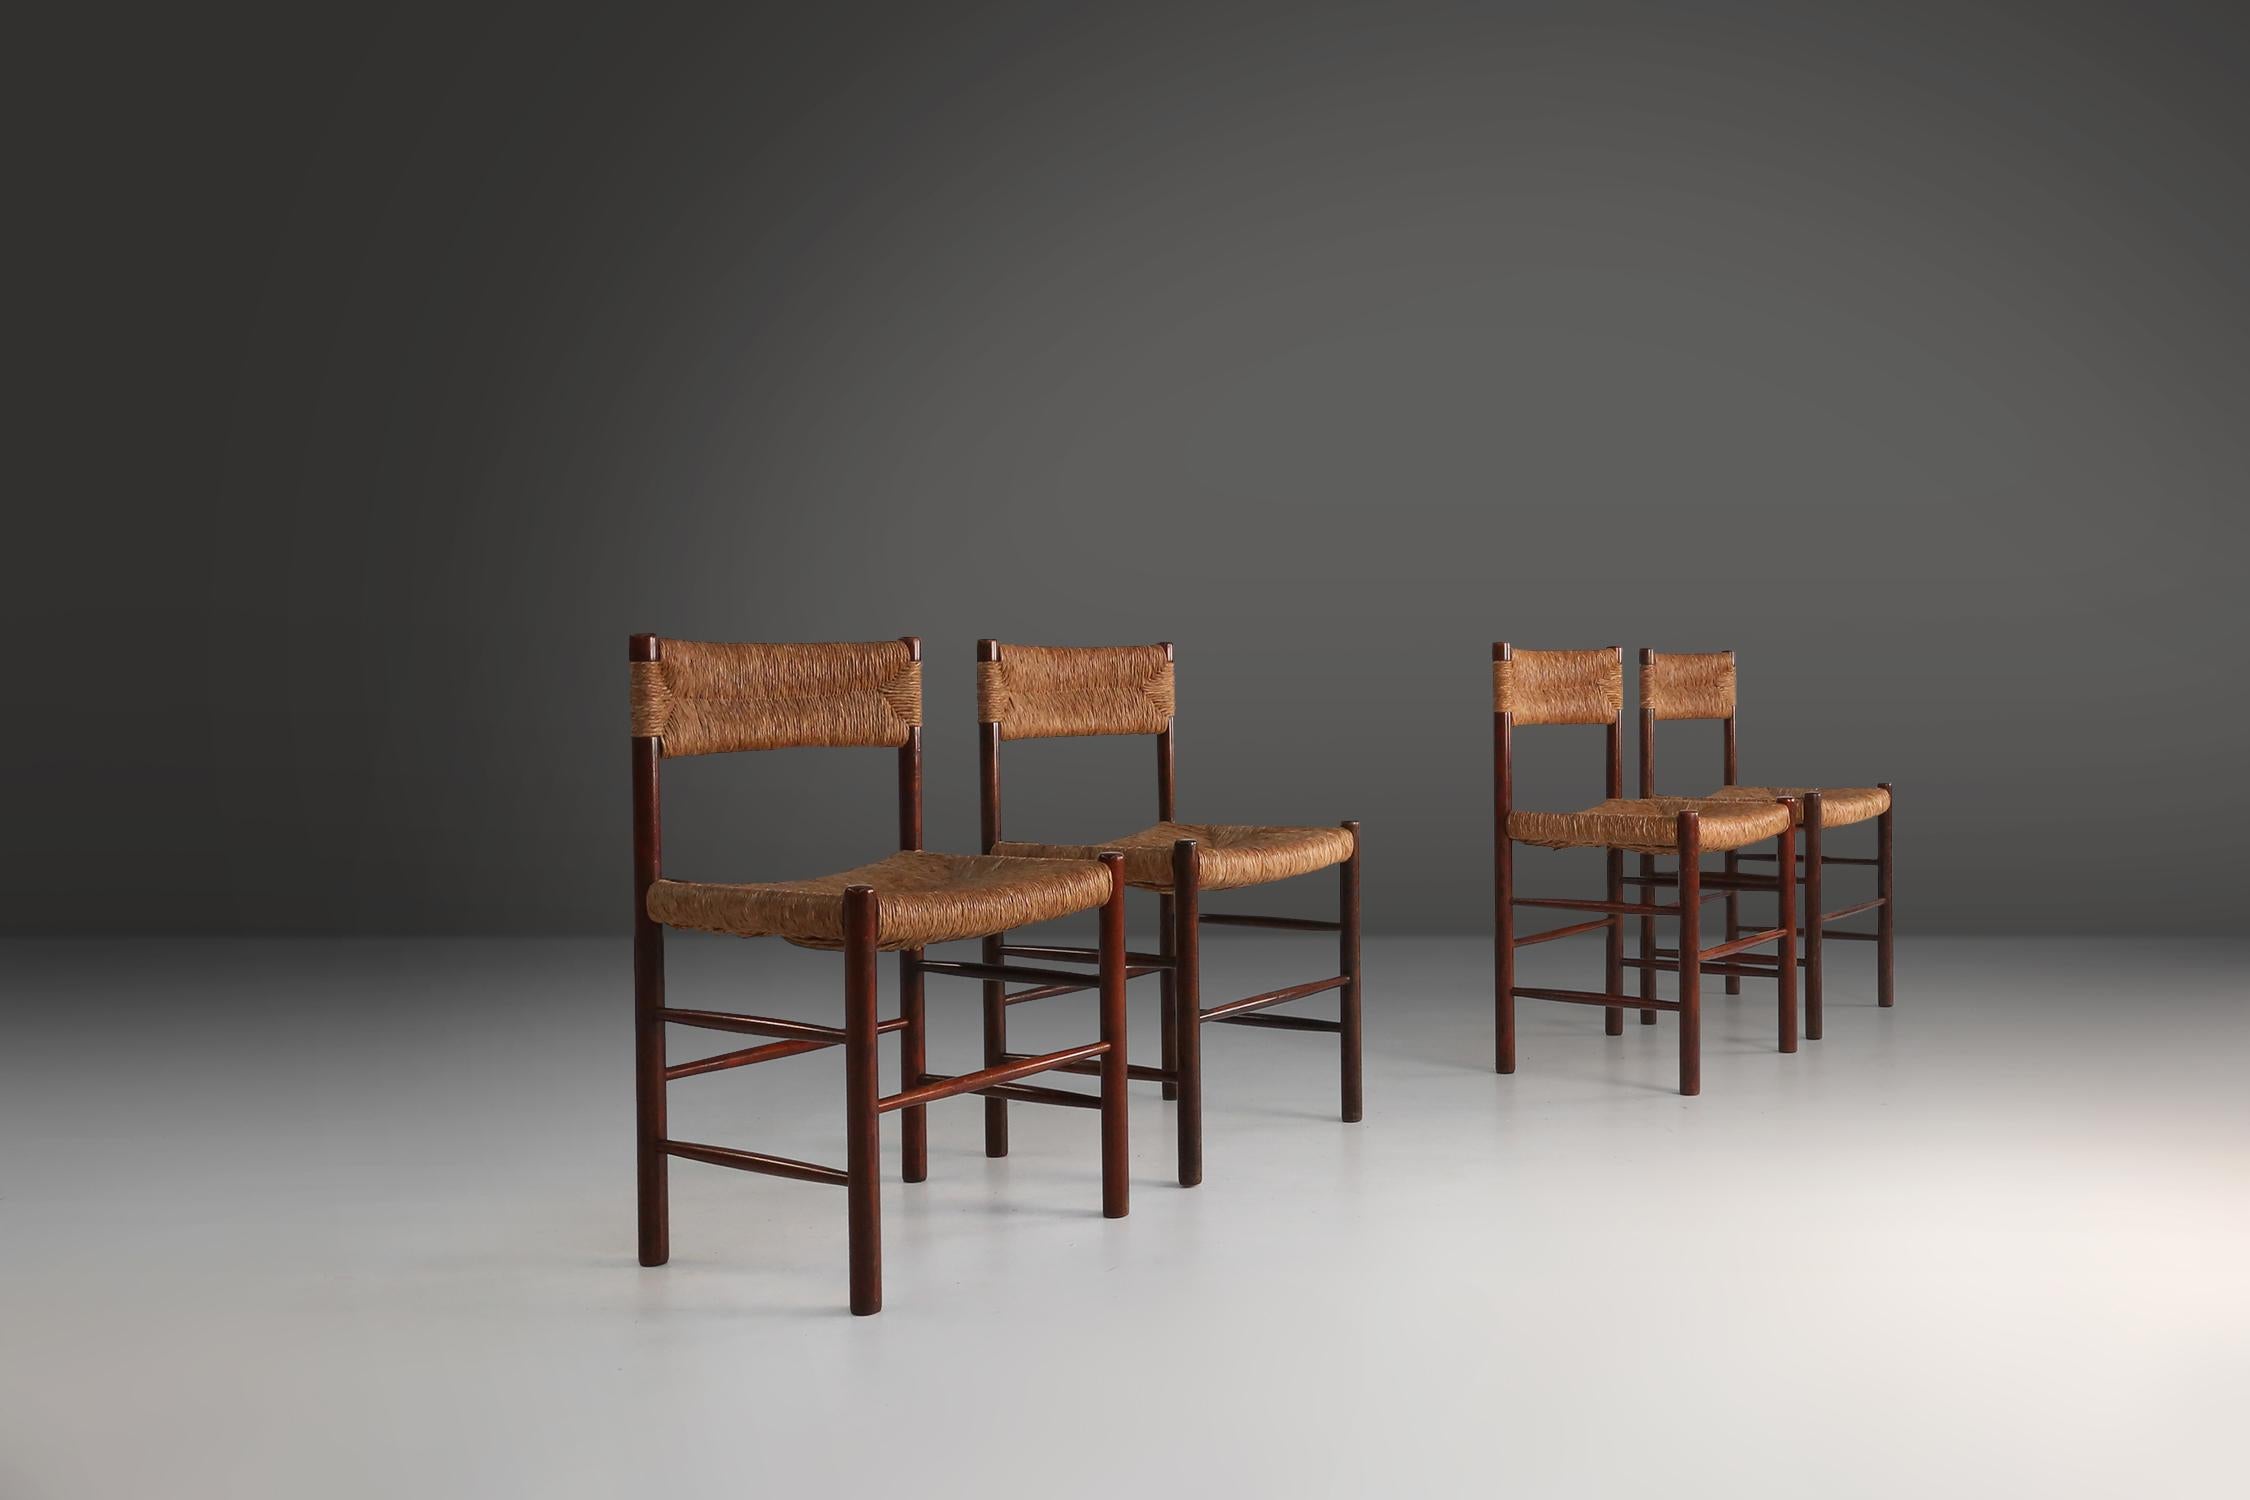 France / 1950s / 4 Dordogne chairs / Charlotte Perriand / Sentou / wicker and wood / design classic / mid-century

Set of 4 iconic Dordogne chairs by Charlotte Perriand for Sentou, France, 1950s. These exquisite chairs are a true testament to the